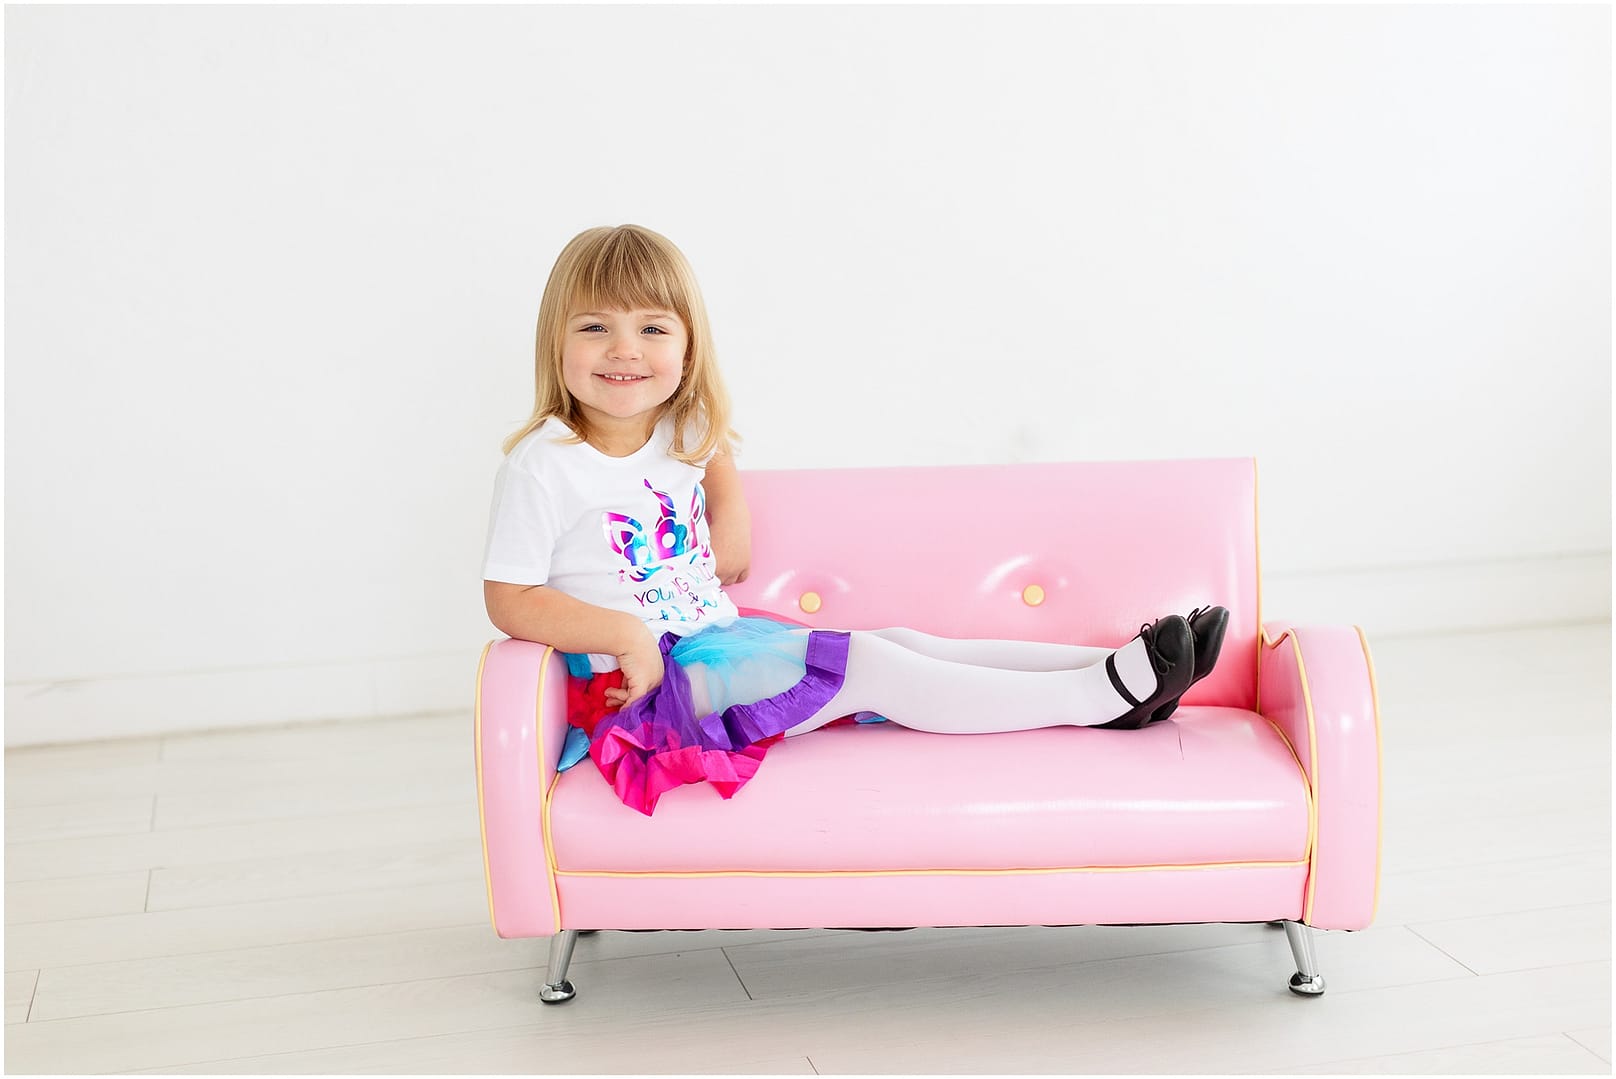 Little girl sits on pink couch in her unicorn outfit. Photo by Tiffany Hix Photography.